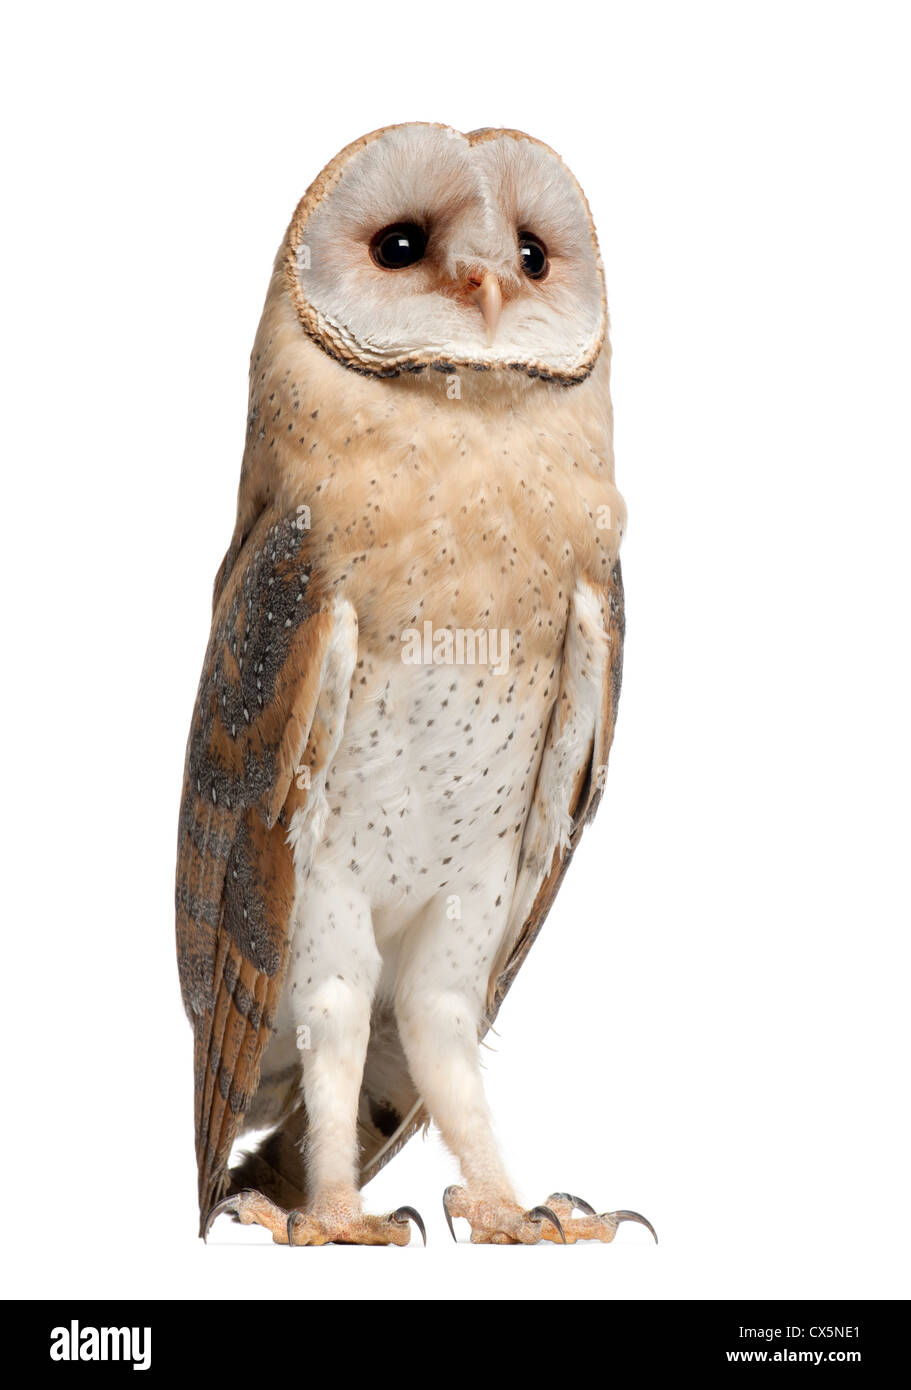 Barn Owl,Tyto alba, 4 months old, standing against white background Stock Photo